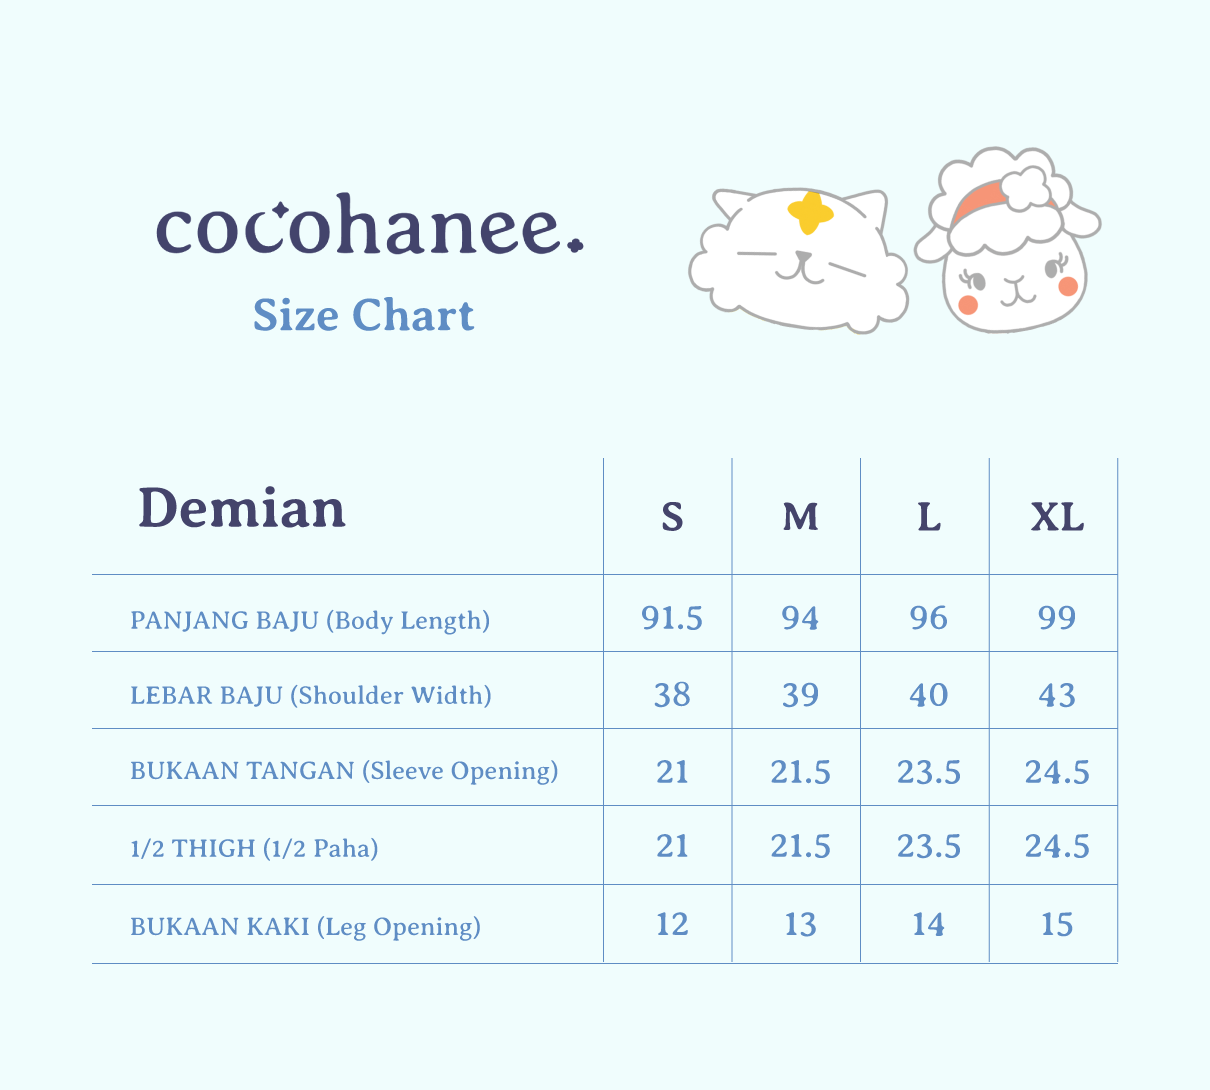 Cocohanee - Demian Overall